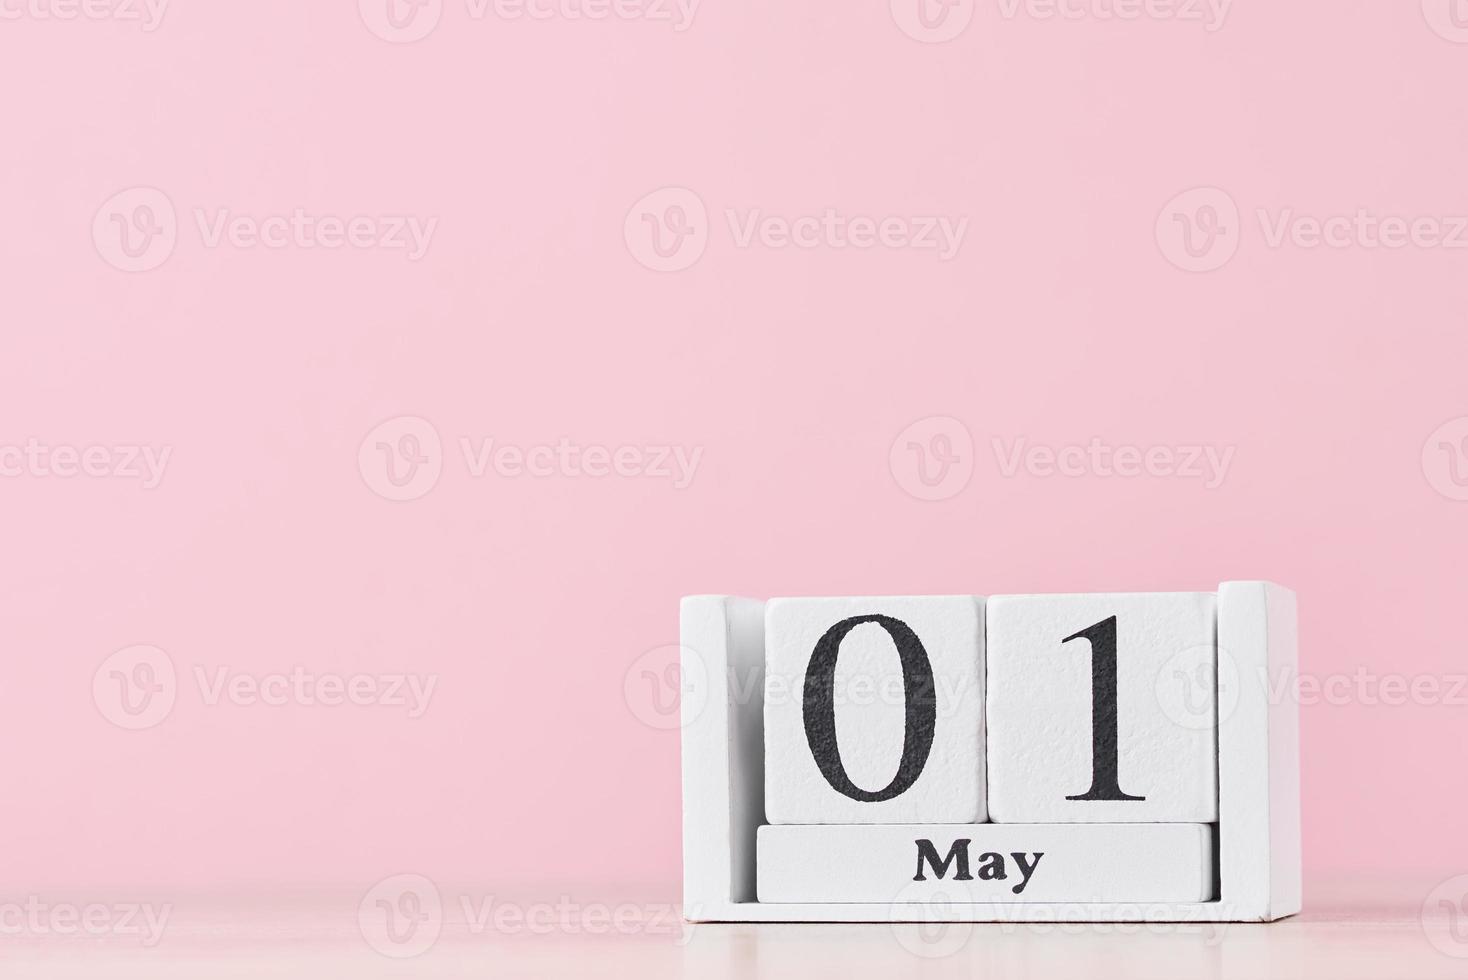 Wooden block calendar with date May 1 on pink background photo